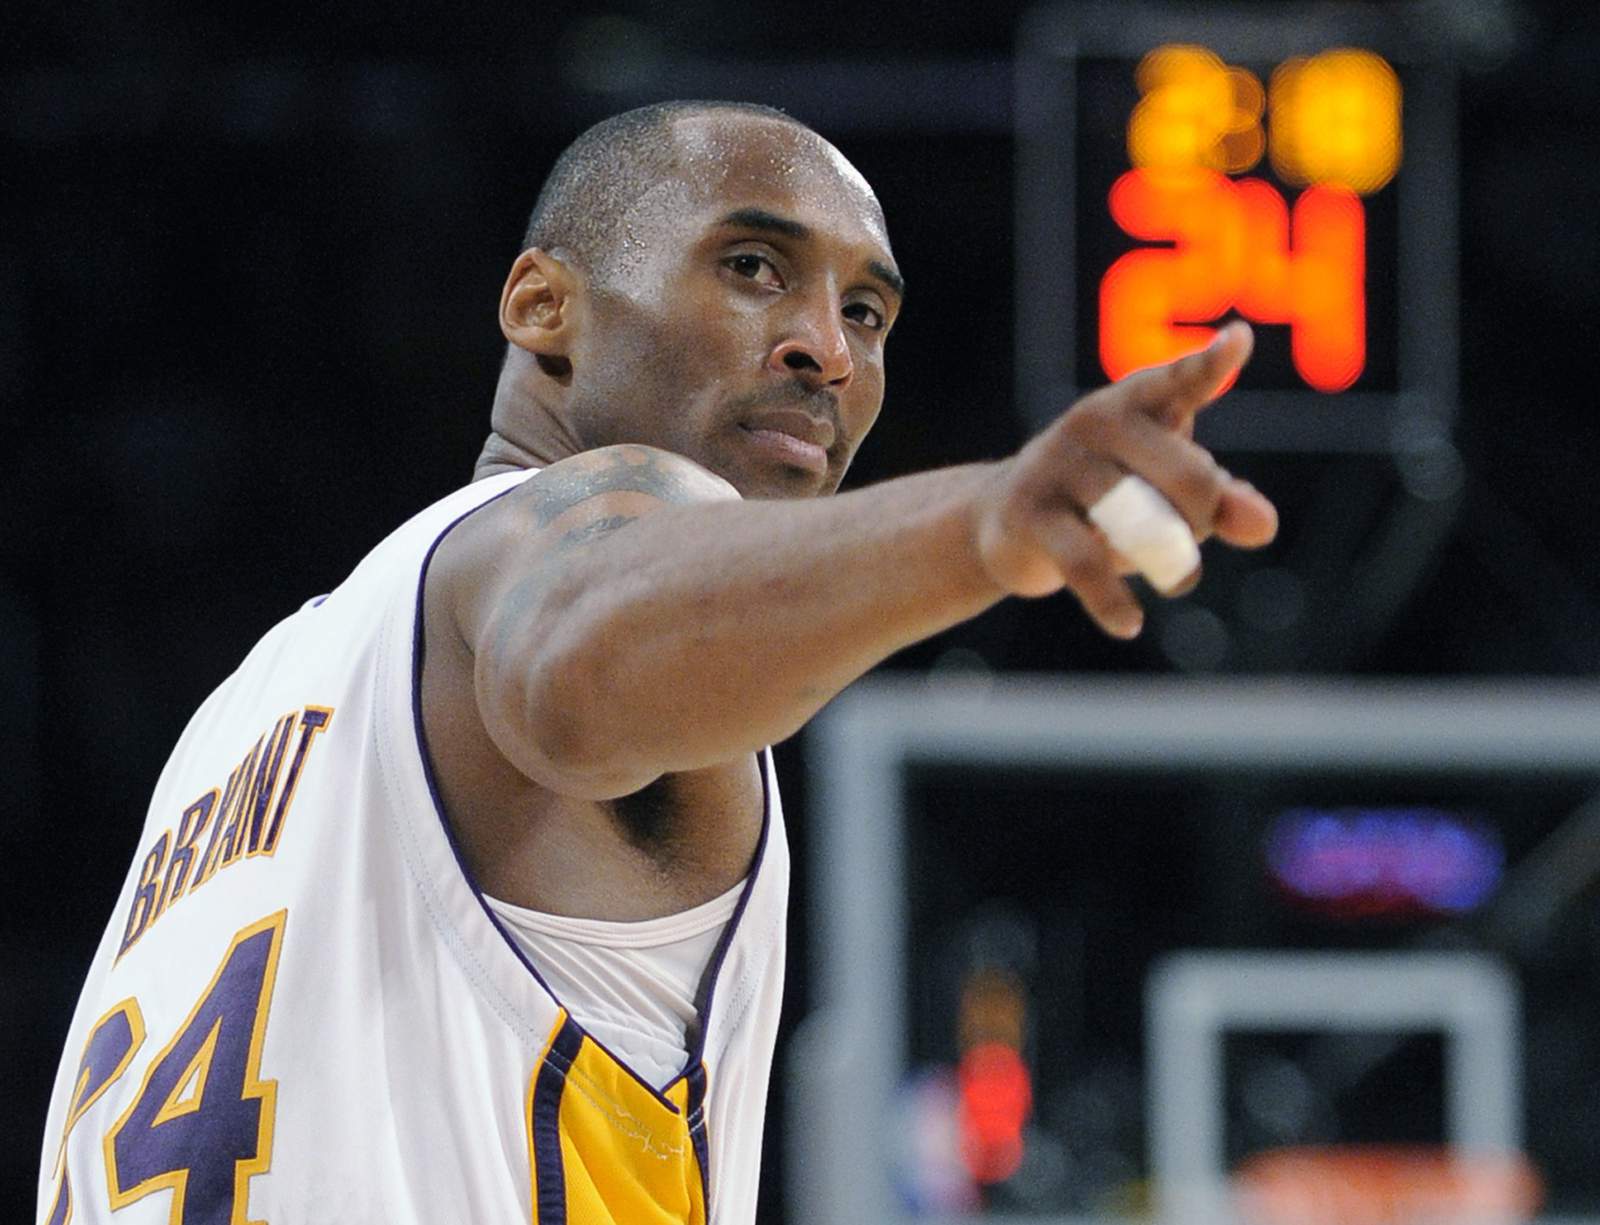 Feds to name likely cause of Kobe Bryant helicopter crash